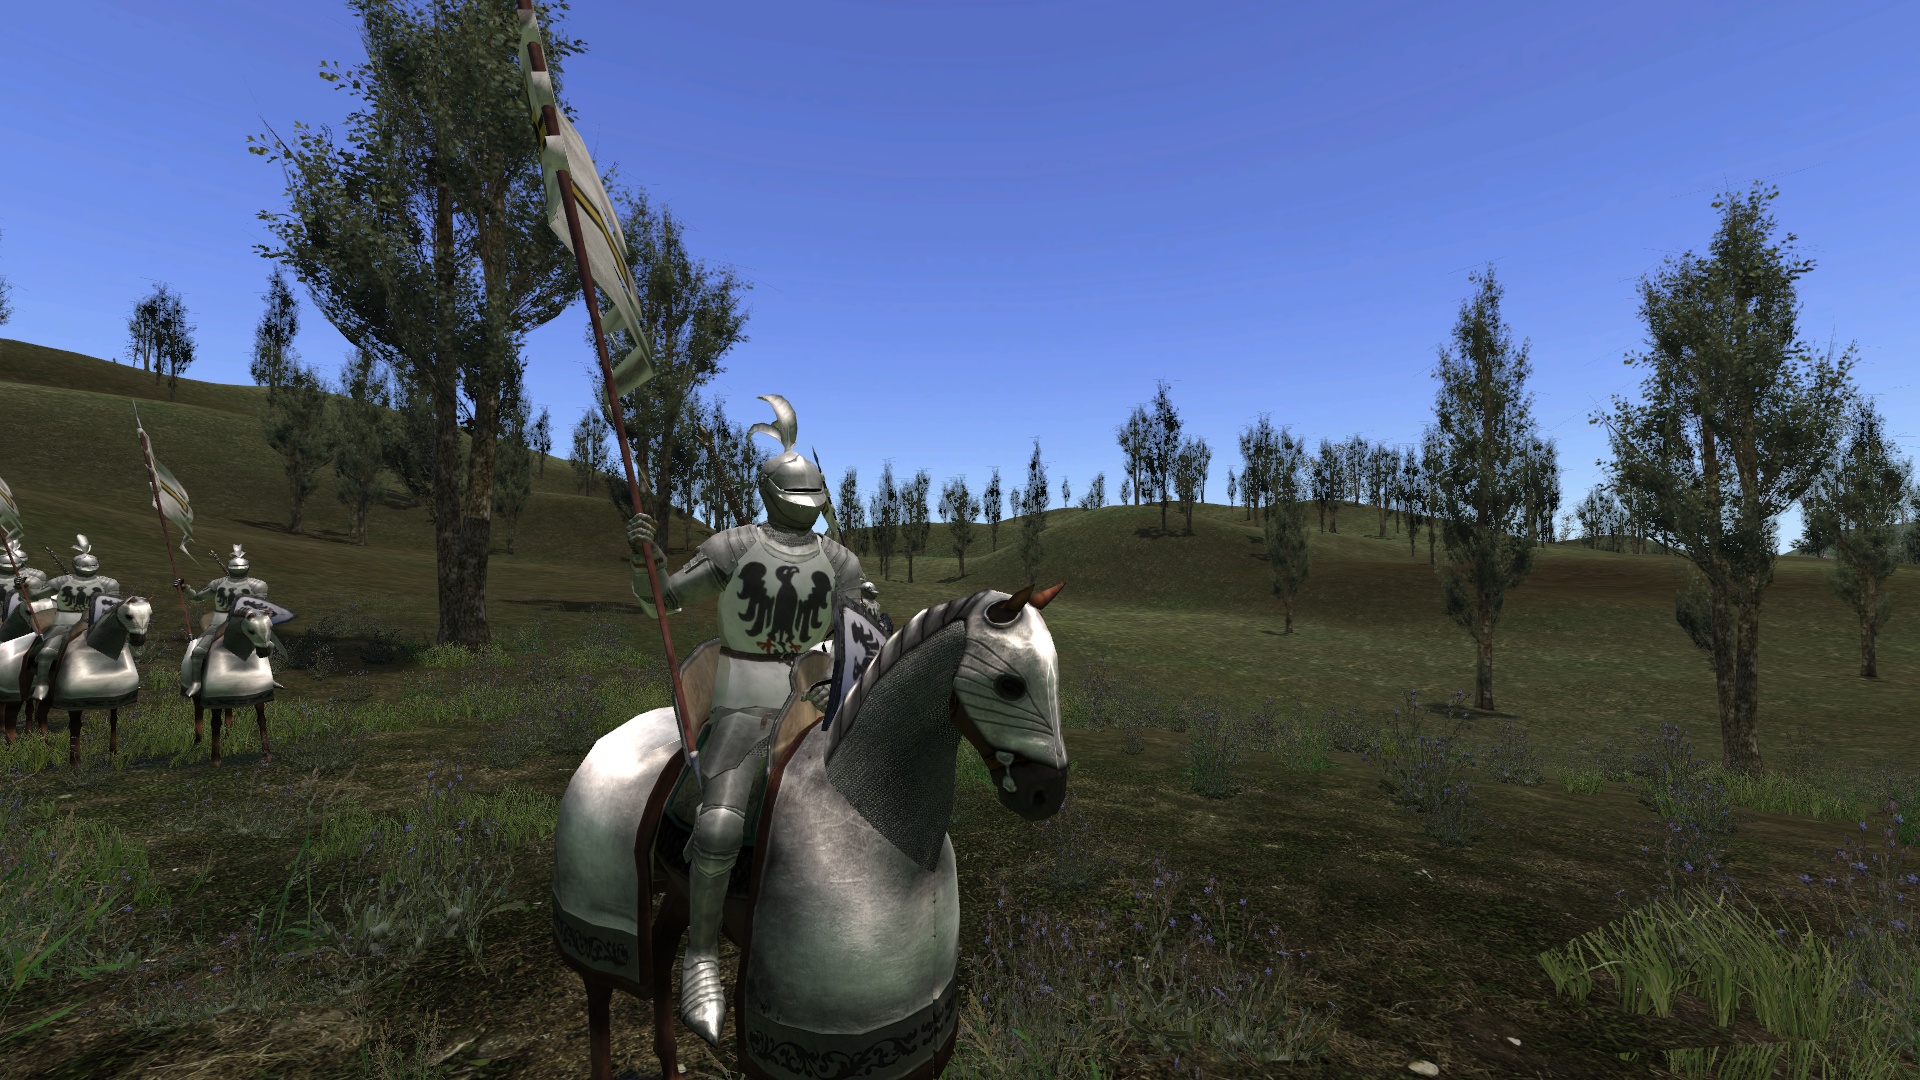 Combat image - A New Dawn mod for Mount & Blade: Warband.